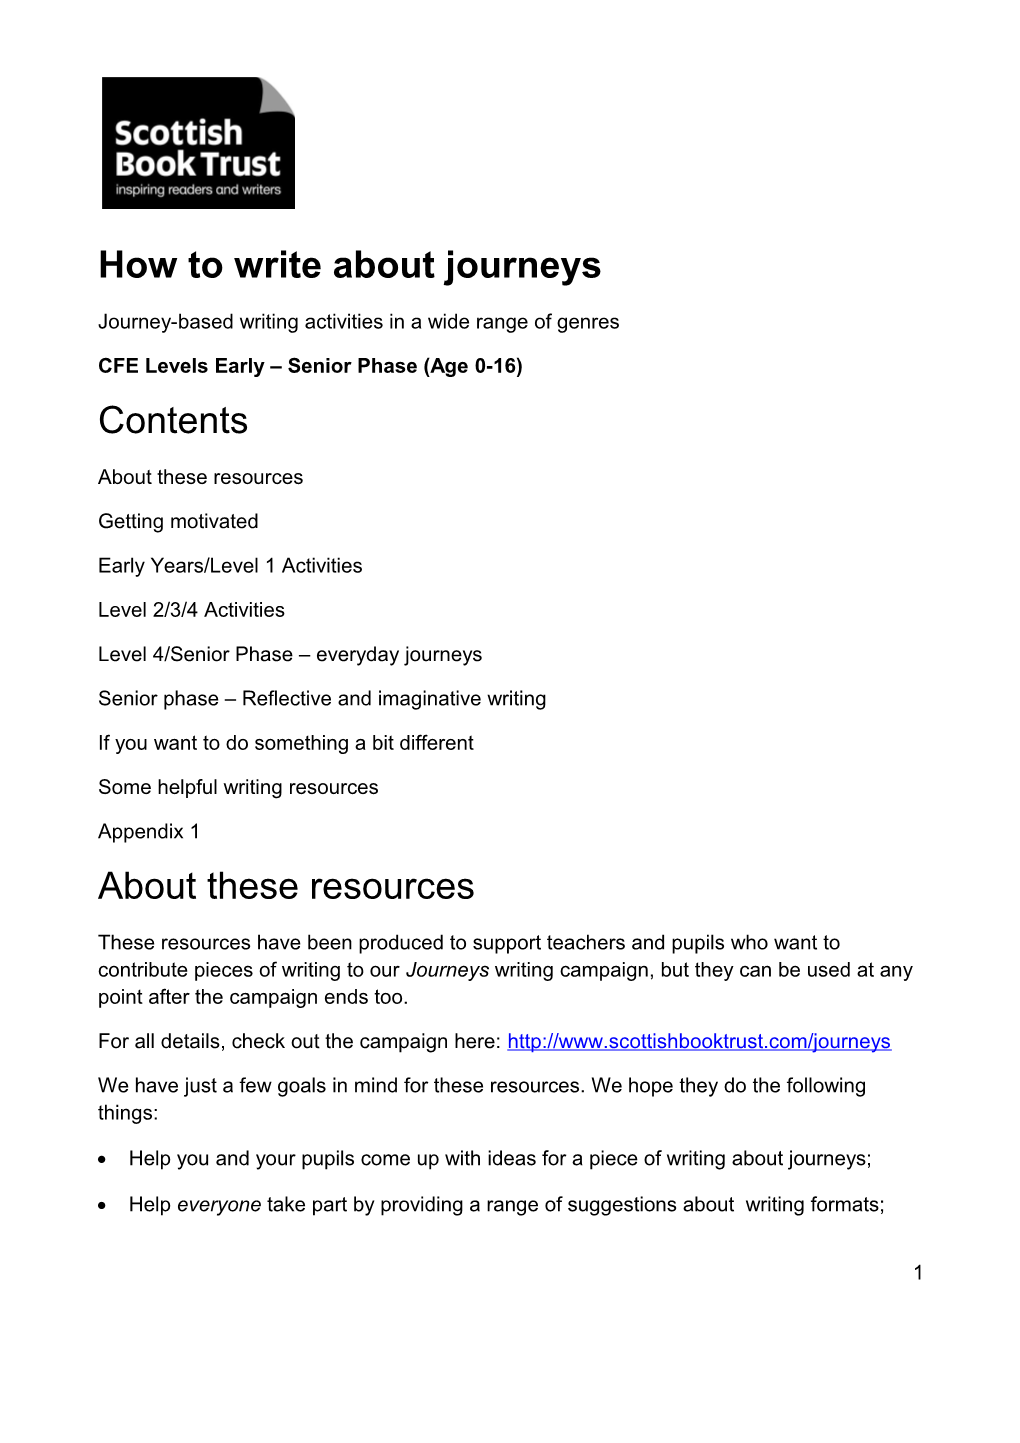 How to Write About Journeys